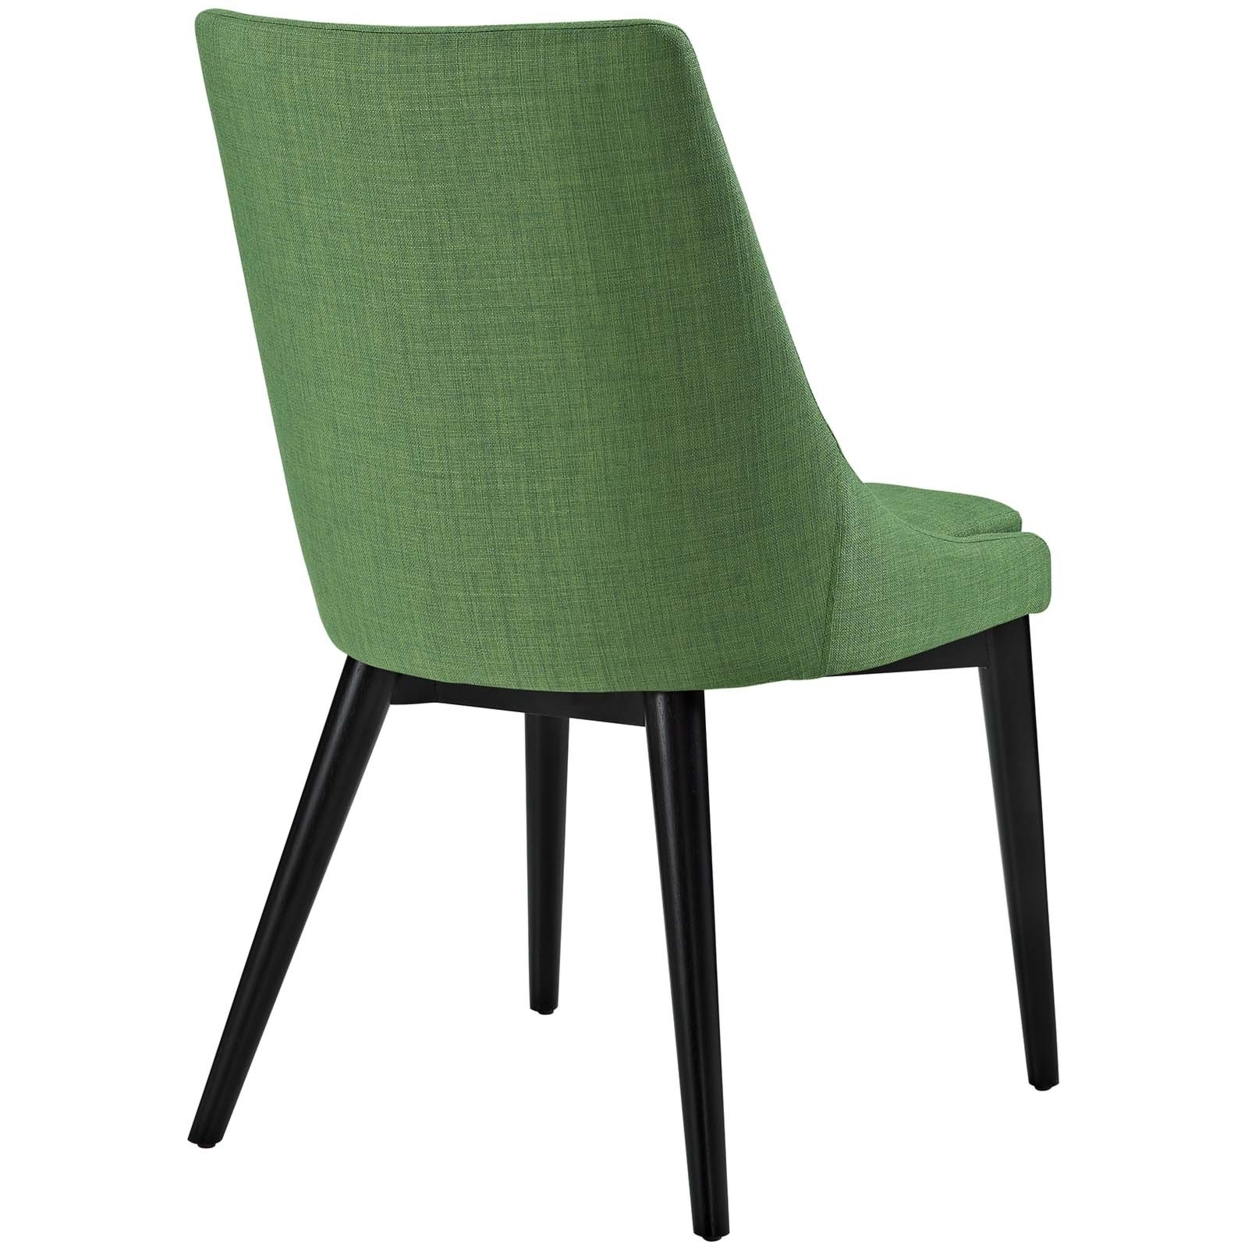 Viscount Fabric Dining Chair, Kelly Green